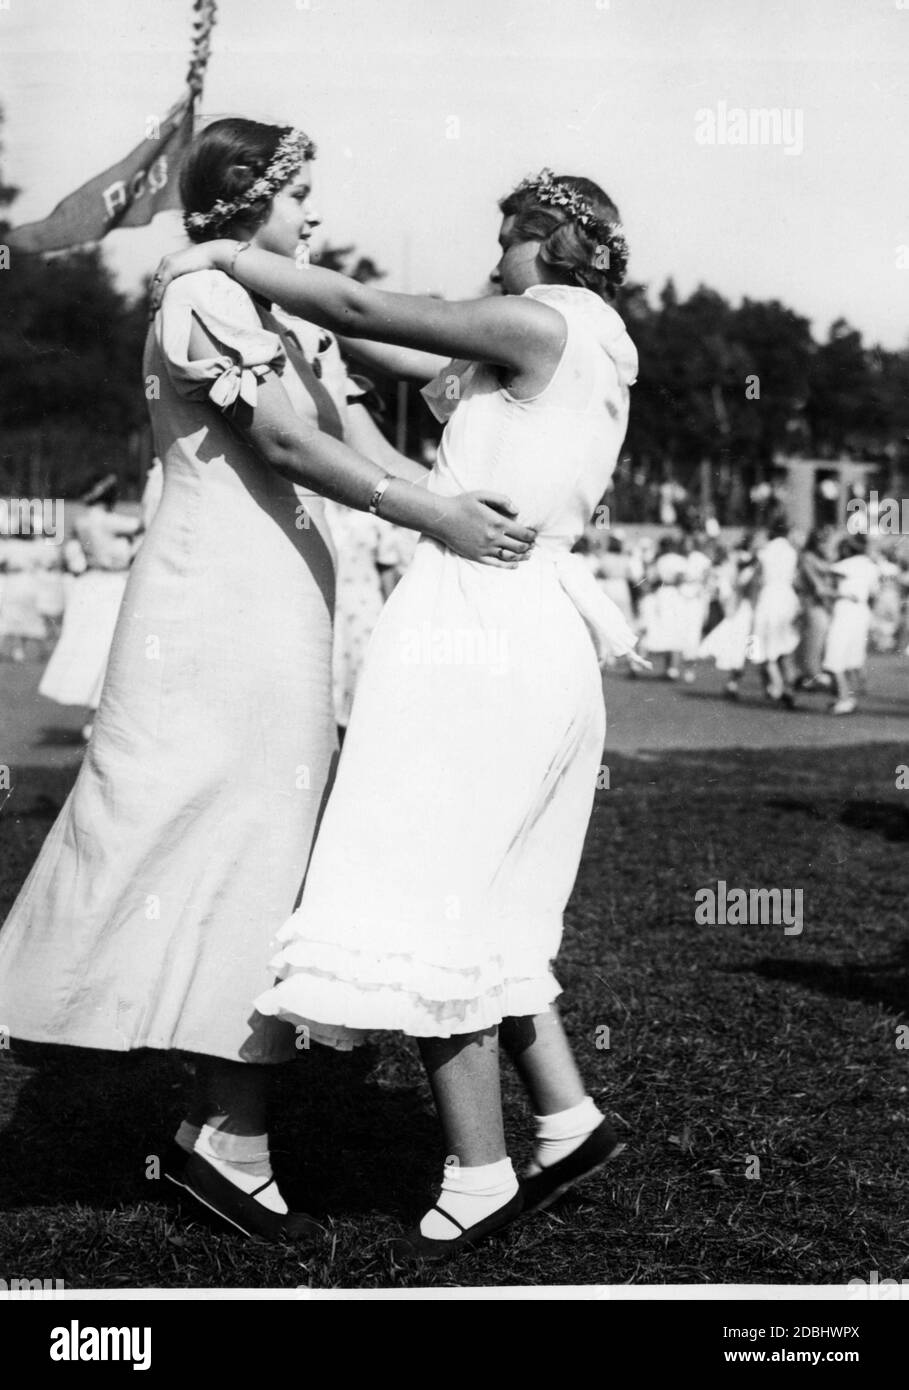 Berlin schools rehearse in the SCC-Stadion for the Day of German Nationality on 16.09.1934. Here a view of dancing schoolgirls. In the background is a flag of the VDA. Stock Photo